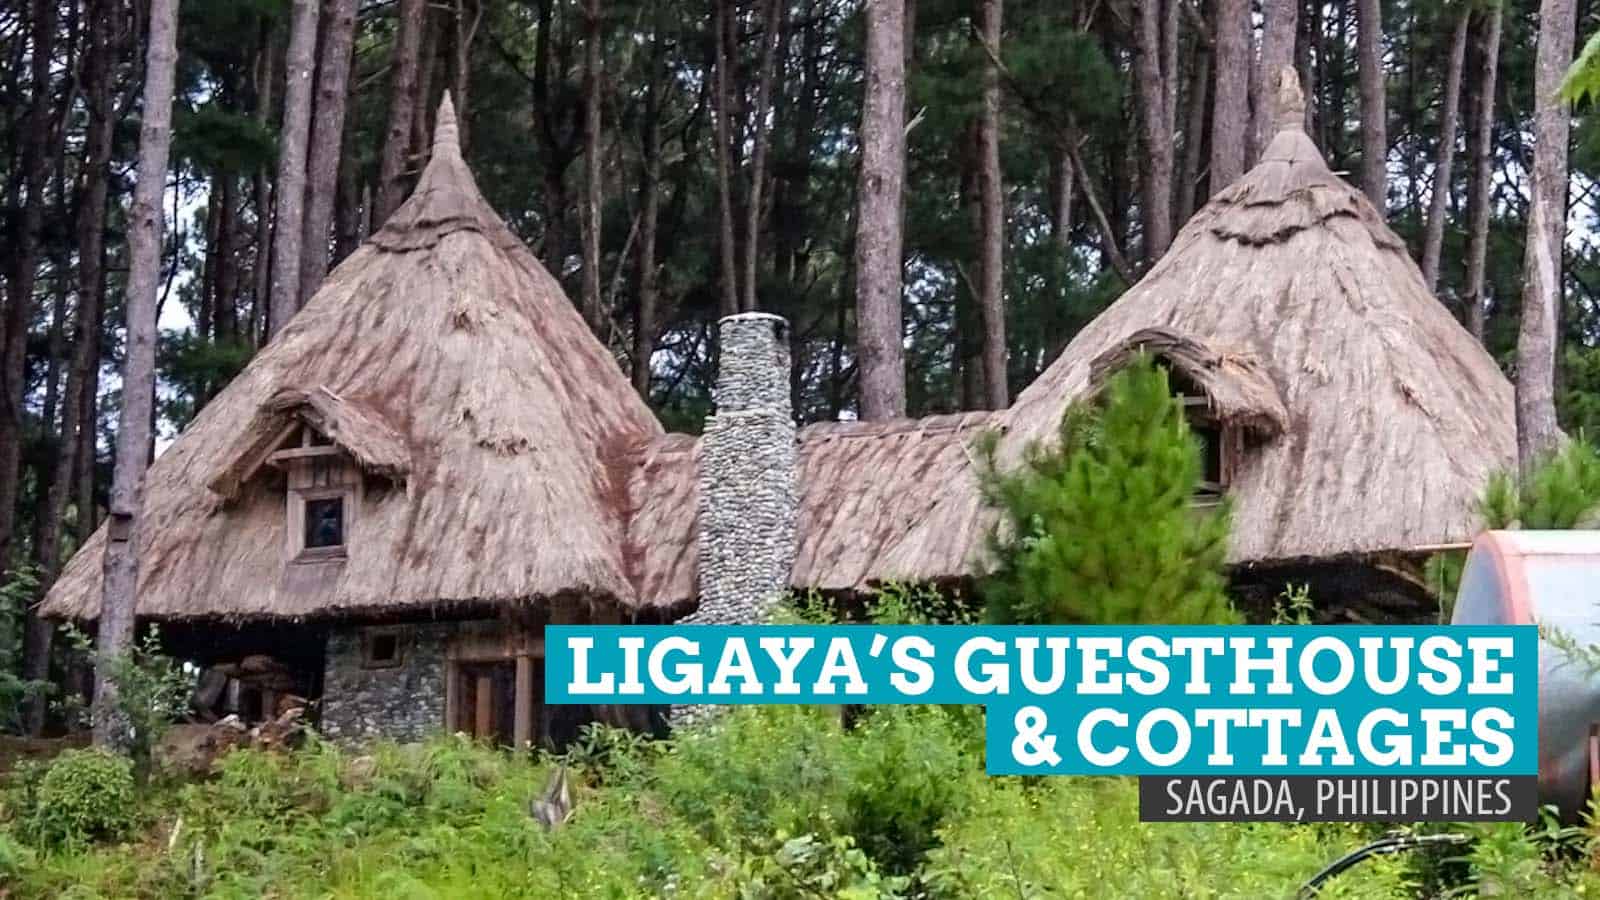 Where to Stay in Sagada: A Guide to the Best Hotels and Inns